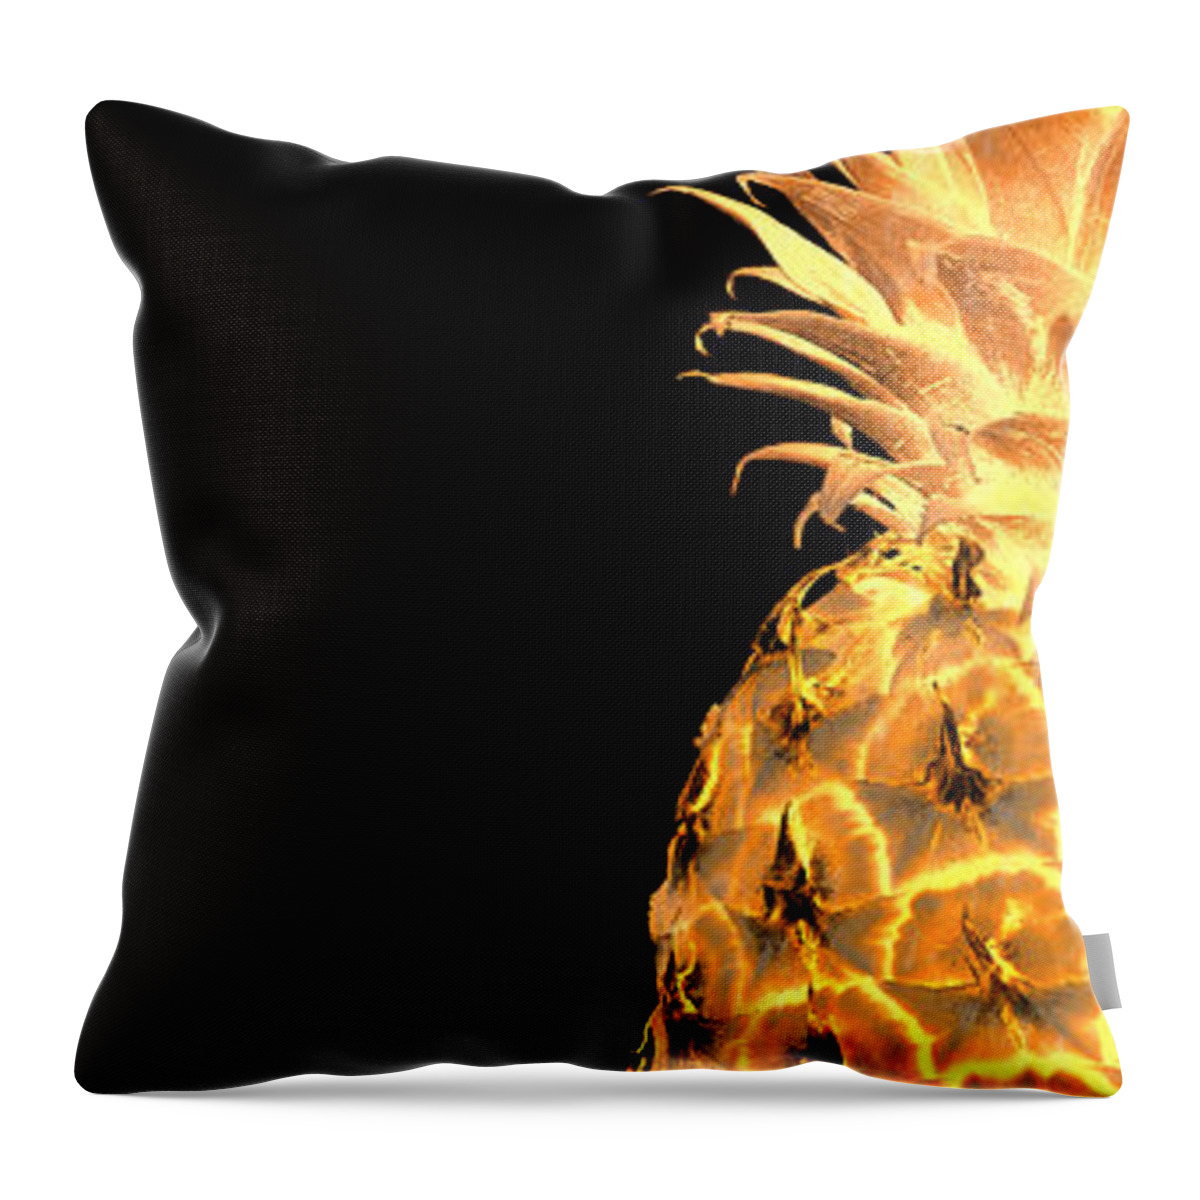 Abstract Throw Pillow featuring the photograph 14gl Abstract Expressive Pineapple Digital Art by Ricardos Creations